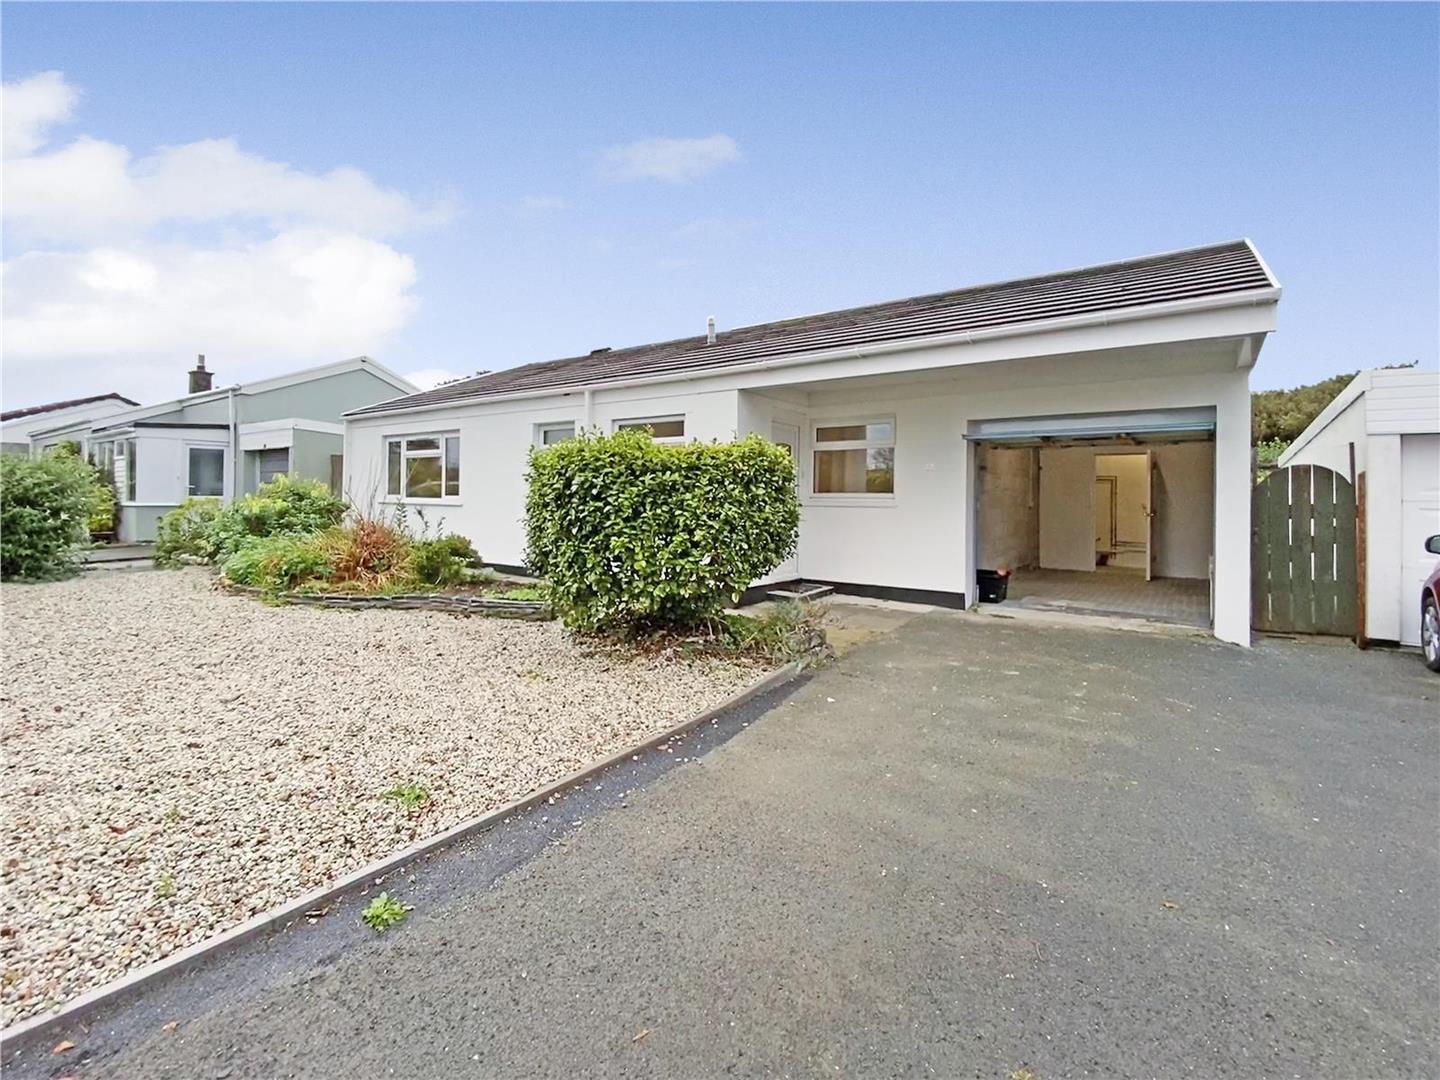 3 bed bungalow to rent in Valley View, Bodmin  - Property Image 1